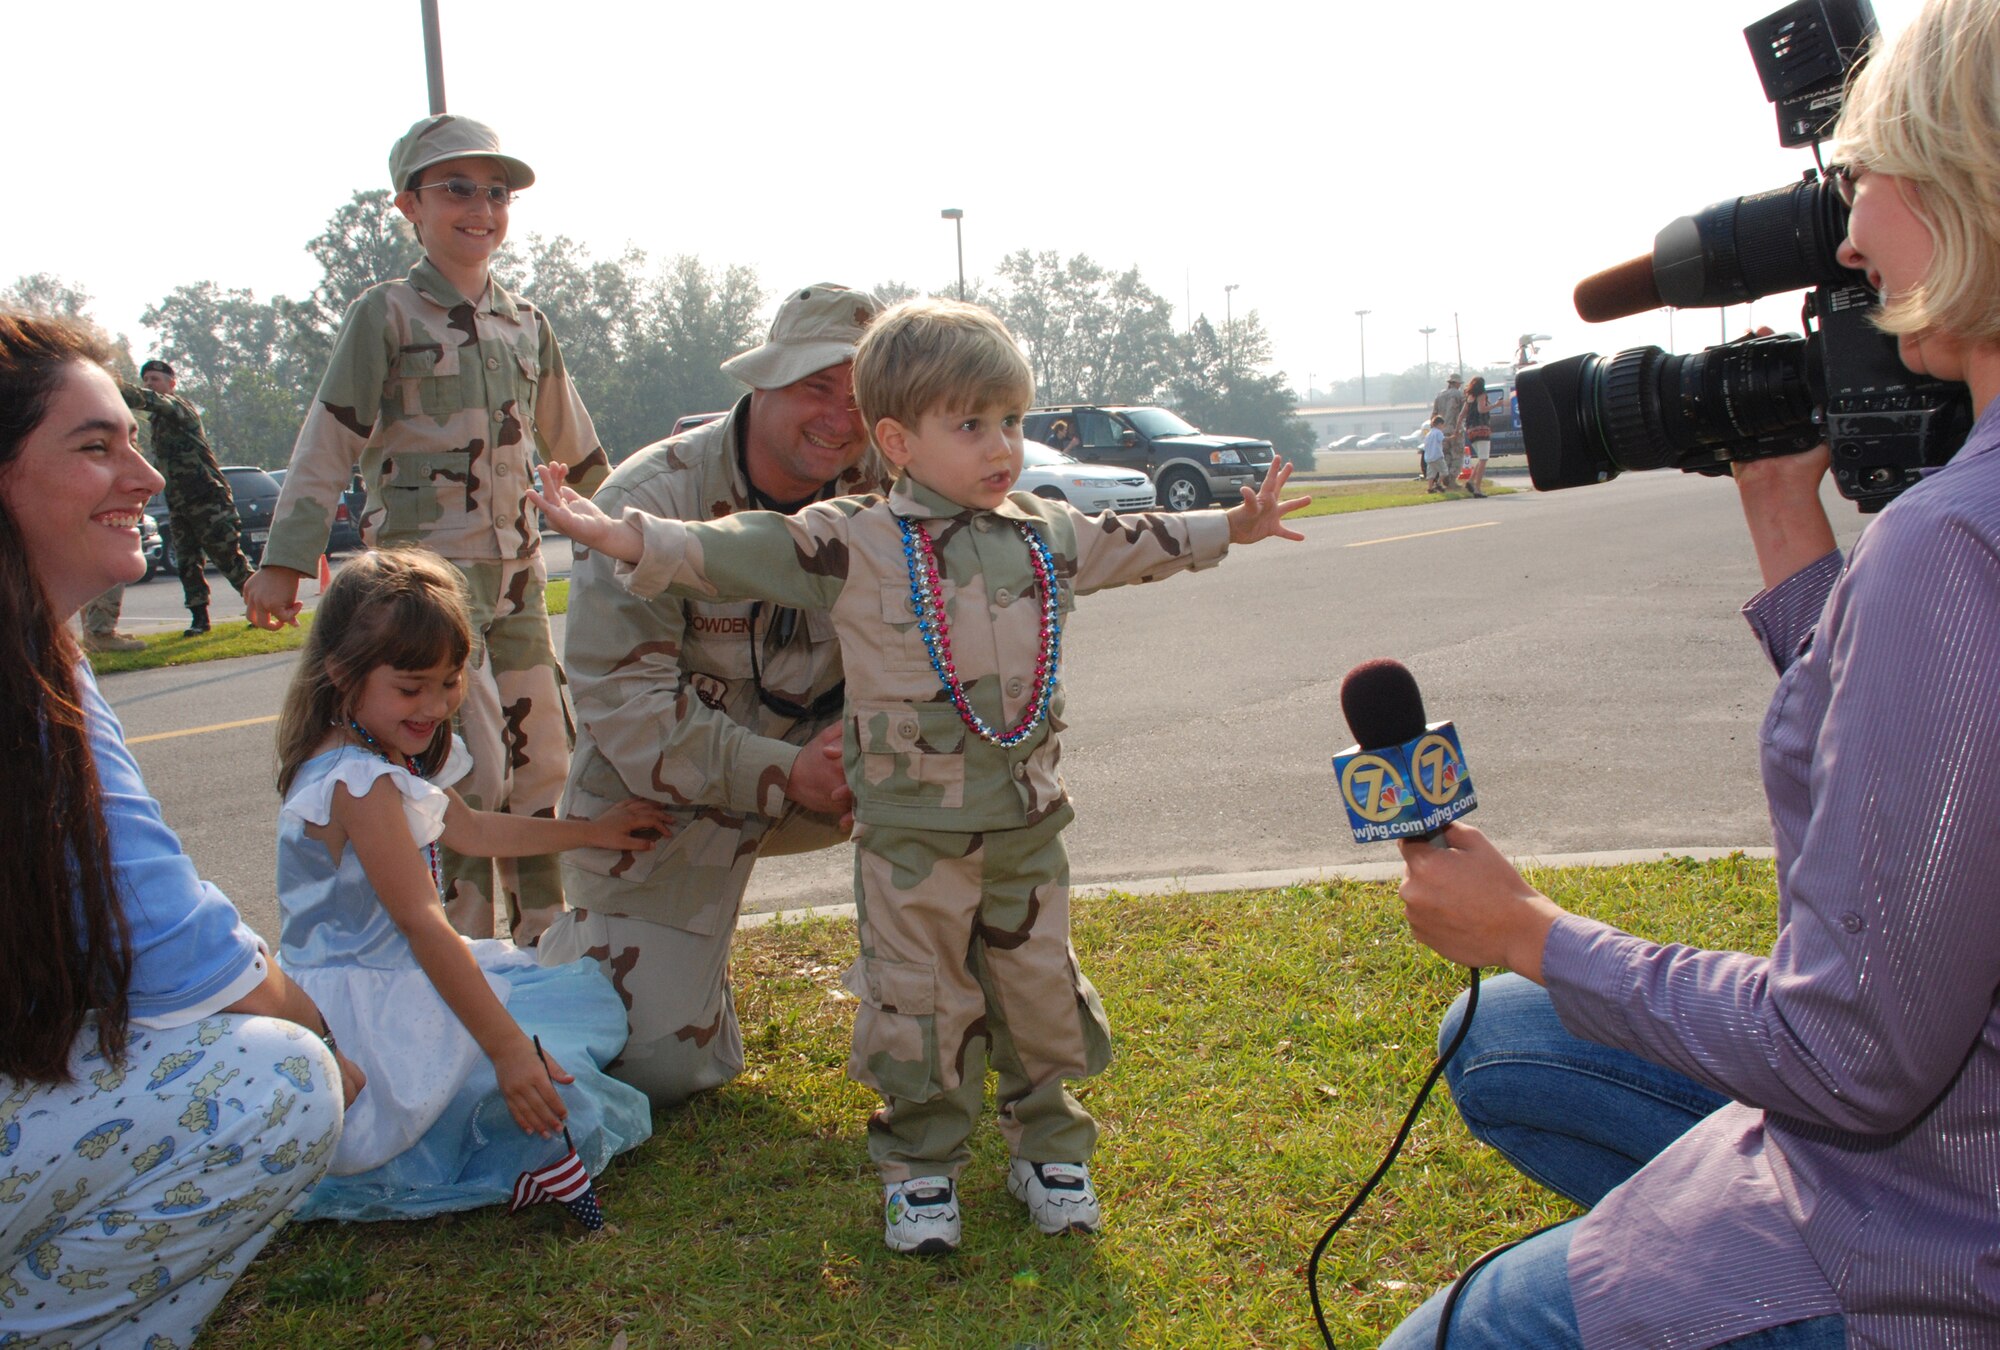 EGLIN AIR FORCE BASE, Fla. -- Ian Bowden, 2, spreads his as wide as he can to illustrate to a local news reporter how big the fish his dad, Maj. Cooper Bowden, is going to catch on their upcoming fishing trip during the homecoming celebration May 24 for the 728th Air Control Squadron. Family members gathered in front of the squadron as more than 175 members of the 728th ACS, the Demons, returned home from a deployment to Southwest Asia in support of Operation Iraqi Freedom. The 728th ACS mission encompasses the widest variety of Air Force careers, affording it global reach and the ability to complete its mission anywhere needed. The Airmen spent the last five months in Iraq controlling and monitoring Iraqi airspace, assisting in providing close air support for troops in conflict and reconnaissance and directing tanker traffic for refueling efforts. The squadron has spent nine of the past 12 months deployed. (U.S. Air Force photo by Staff Sgt. Mike Meares)